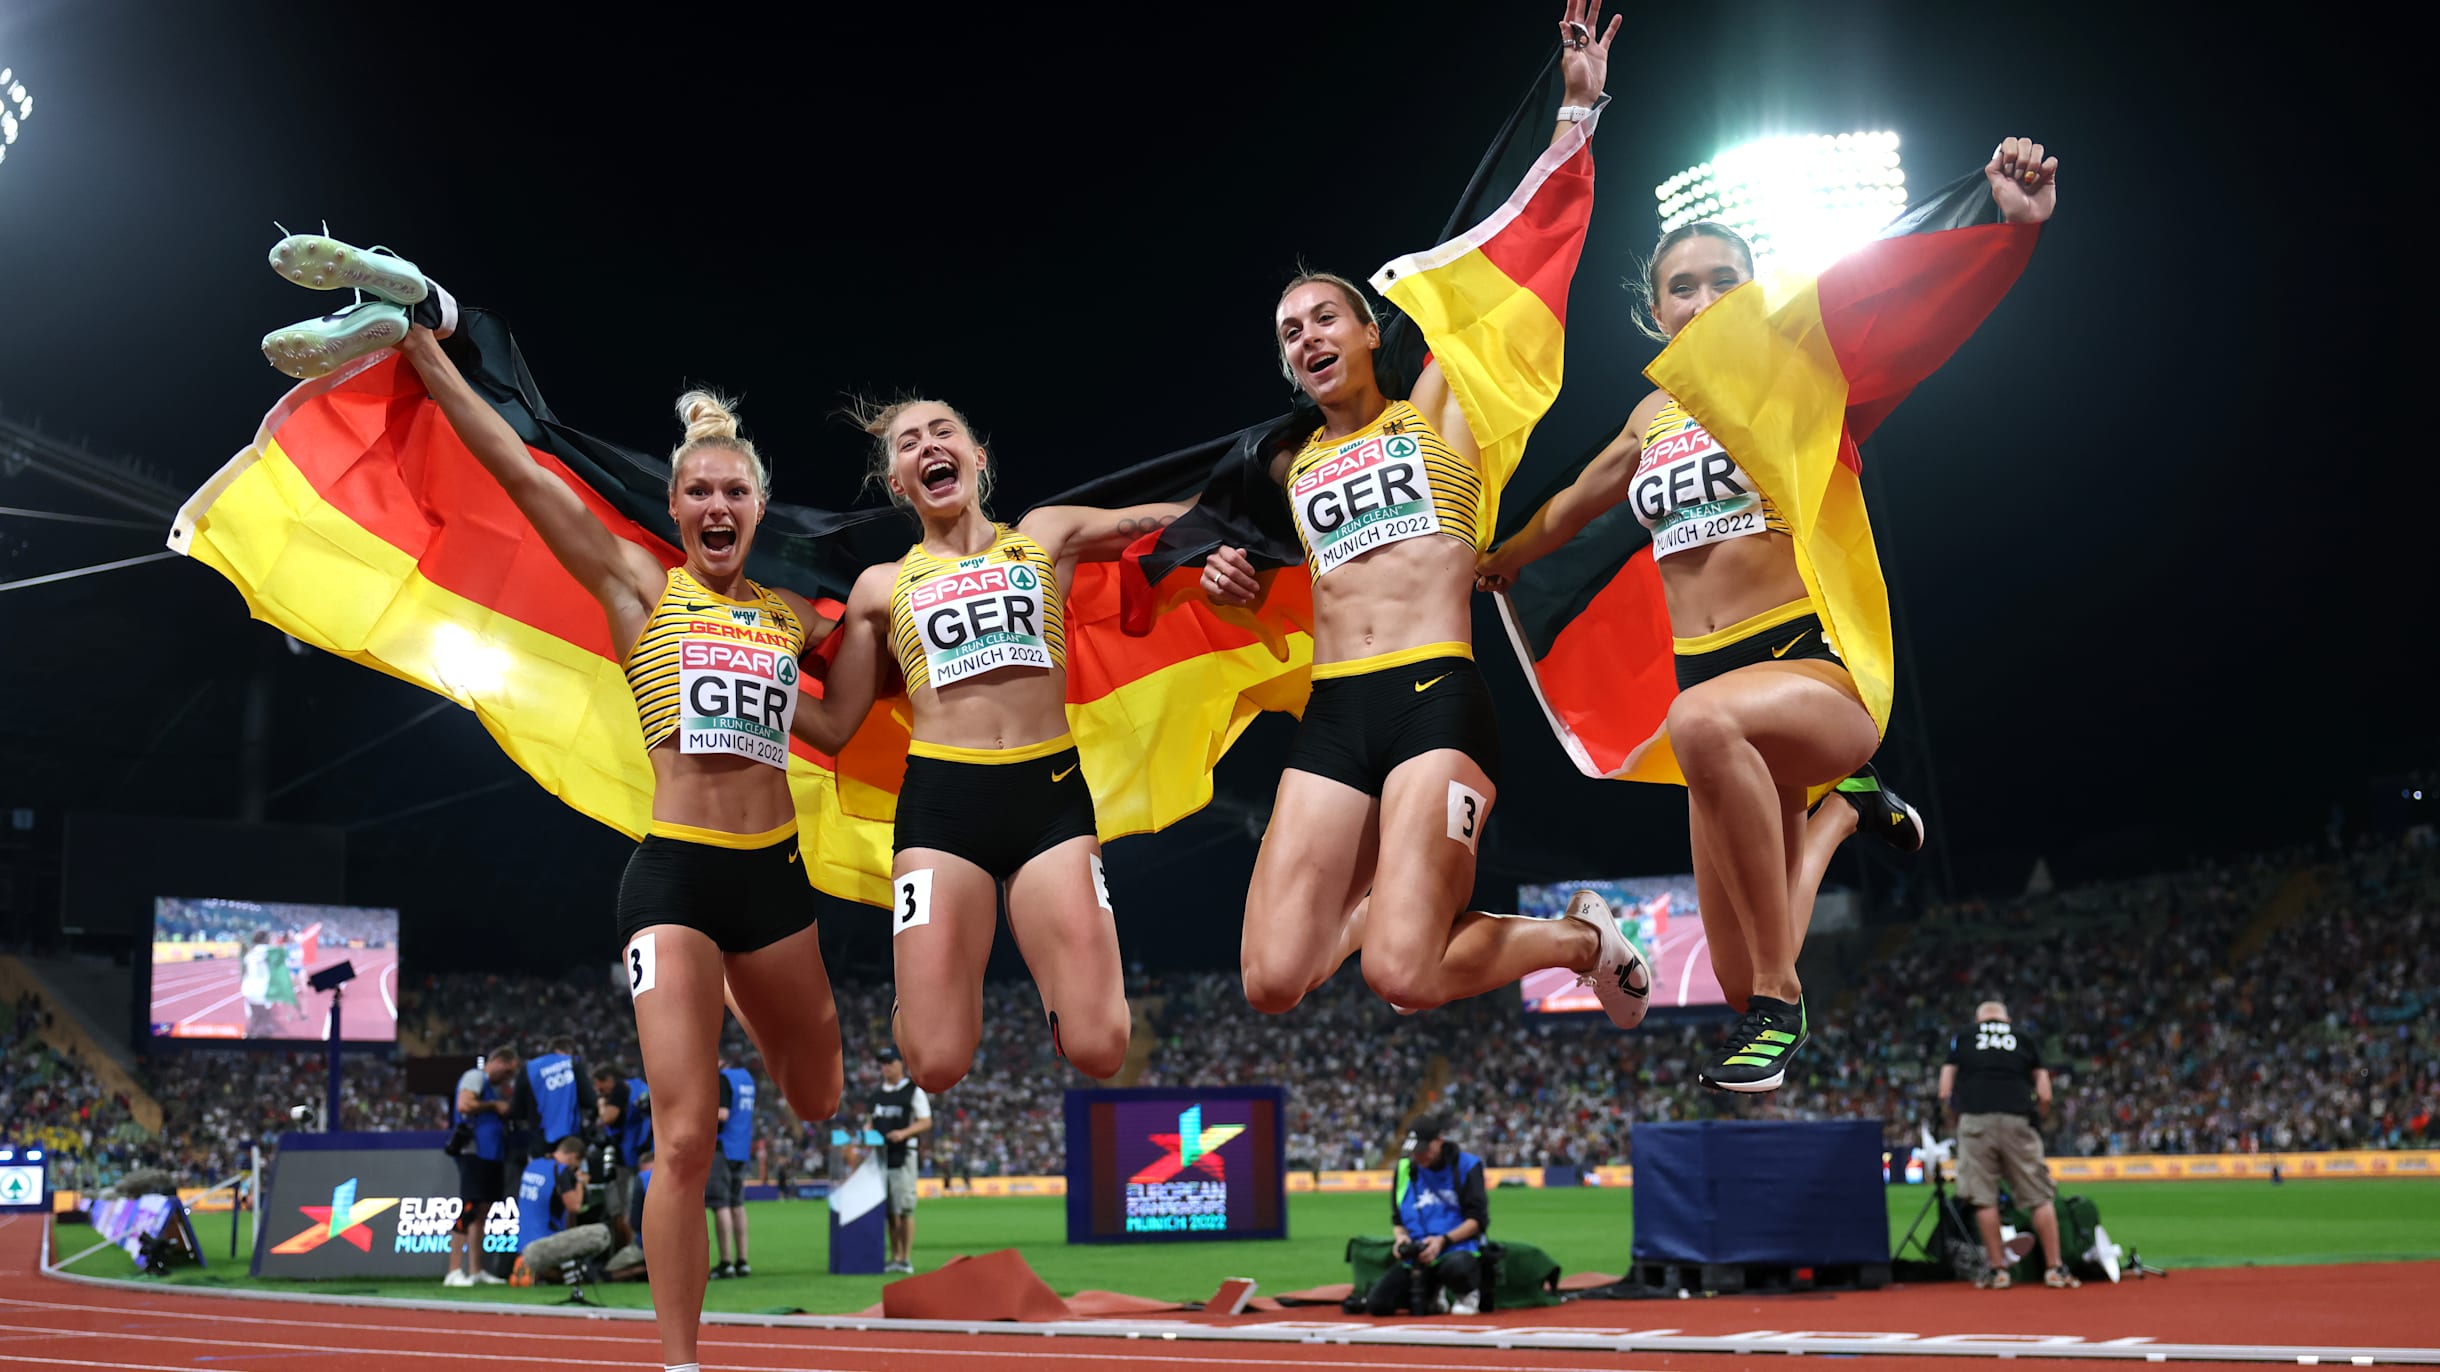 Mahuchikh shines as Germany and Team GB win relay gold on final day of European athletics championships 2022